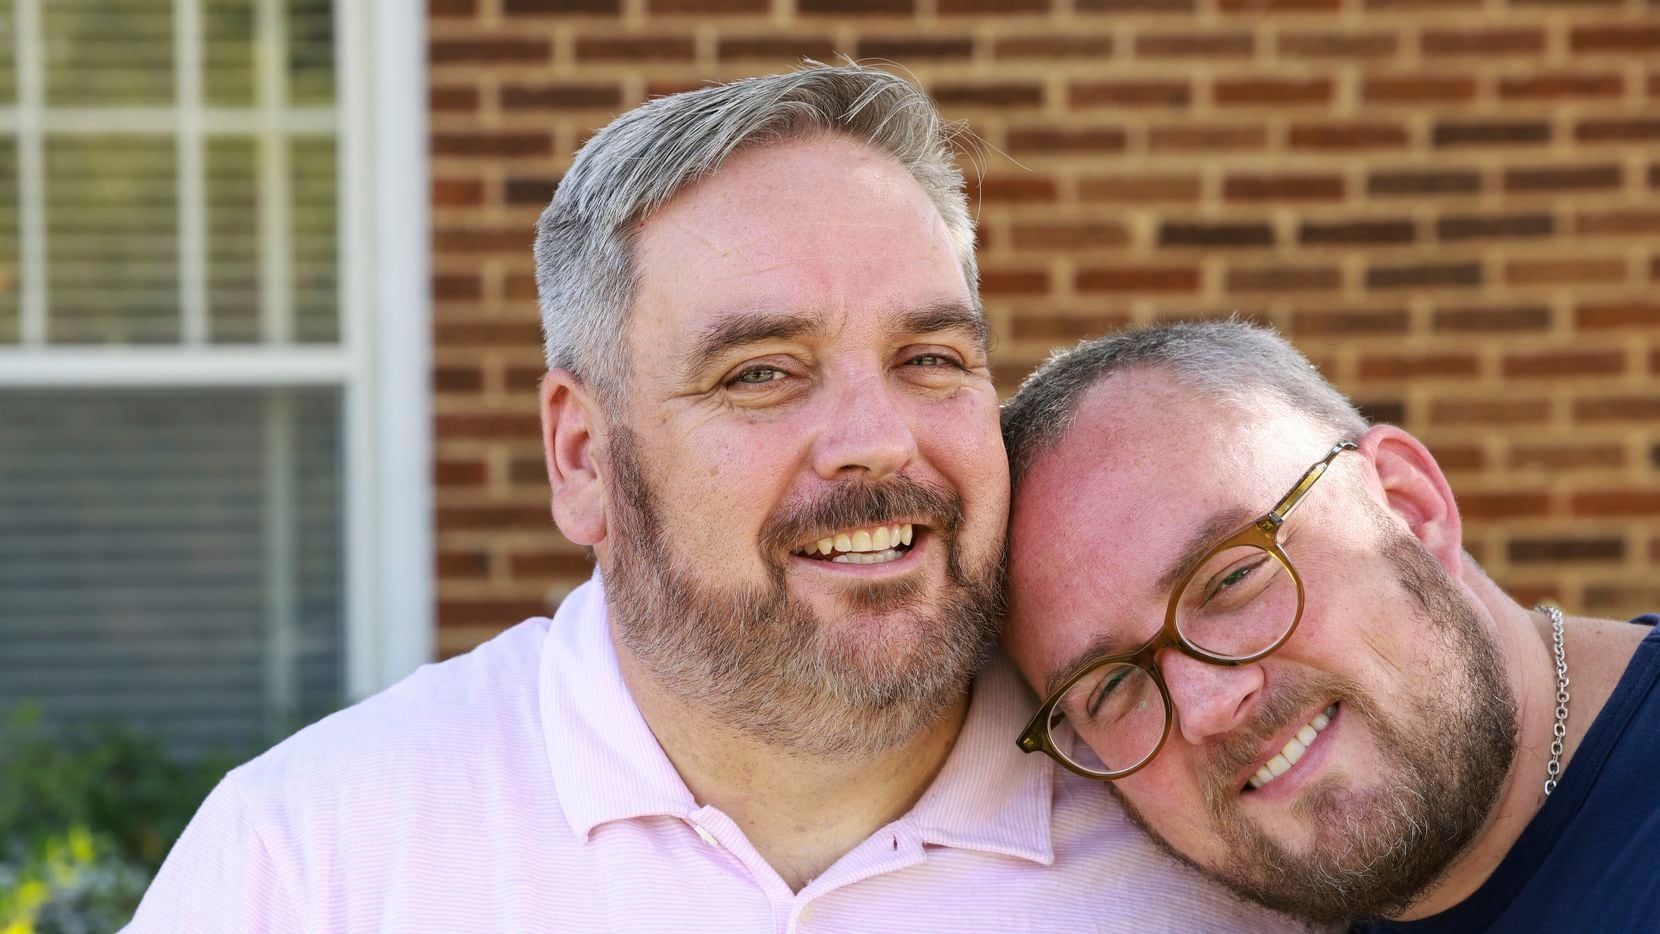 James Miller, 48, and Ricky Morrison, 40, pose for a portrait together at their home,...